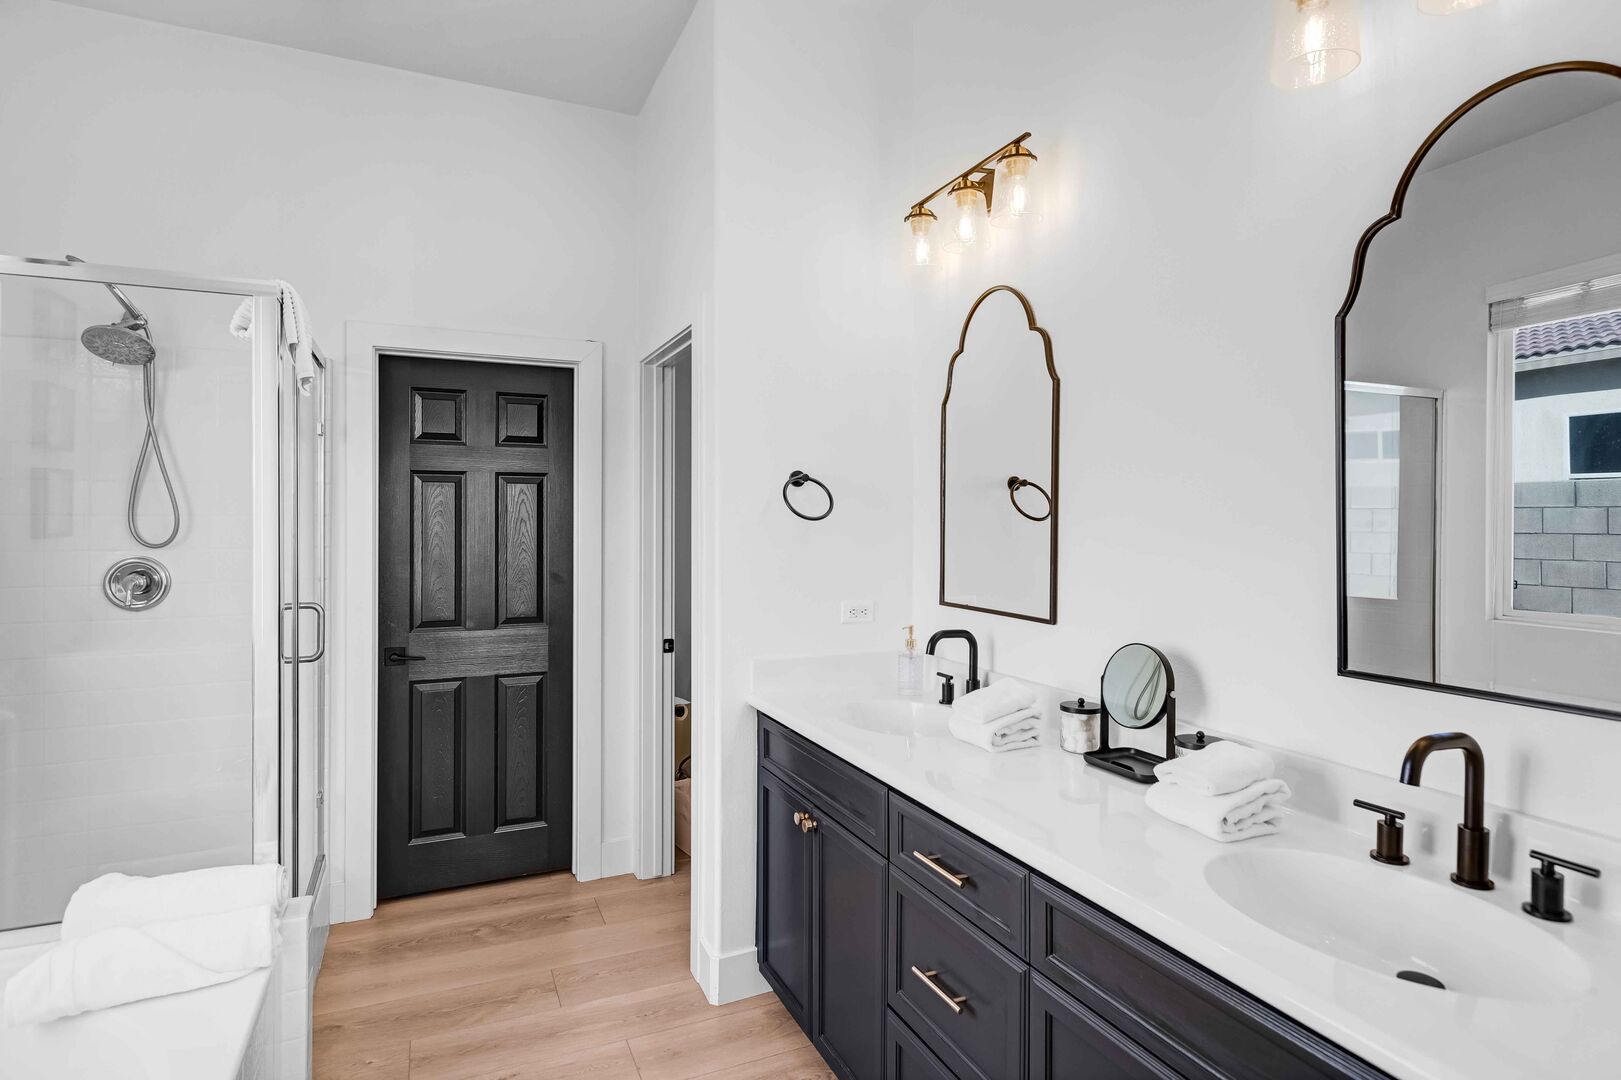 This bathroom showcases modern accents that are even more impressive in person.